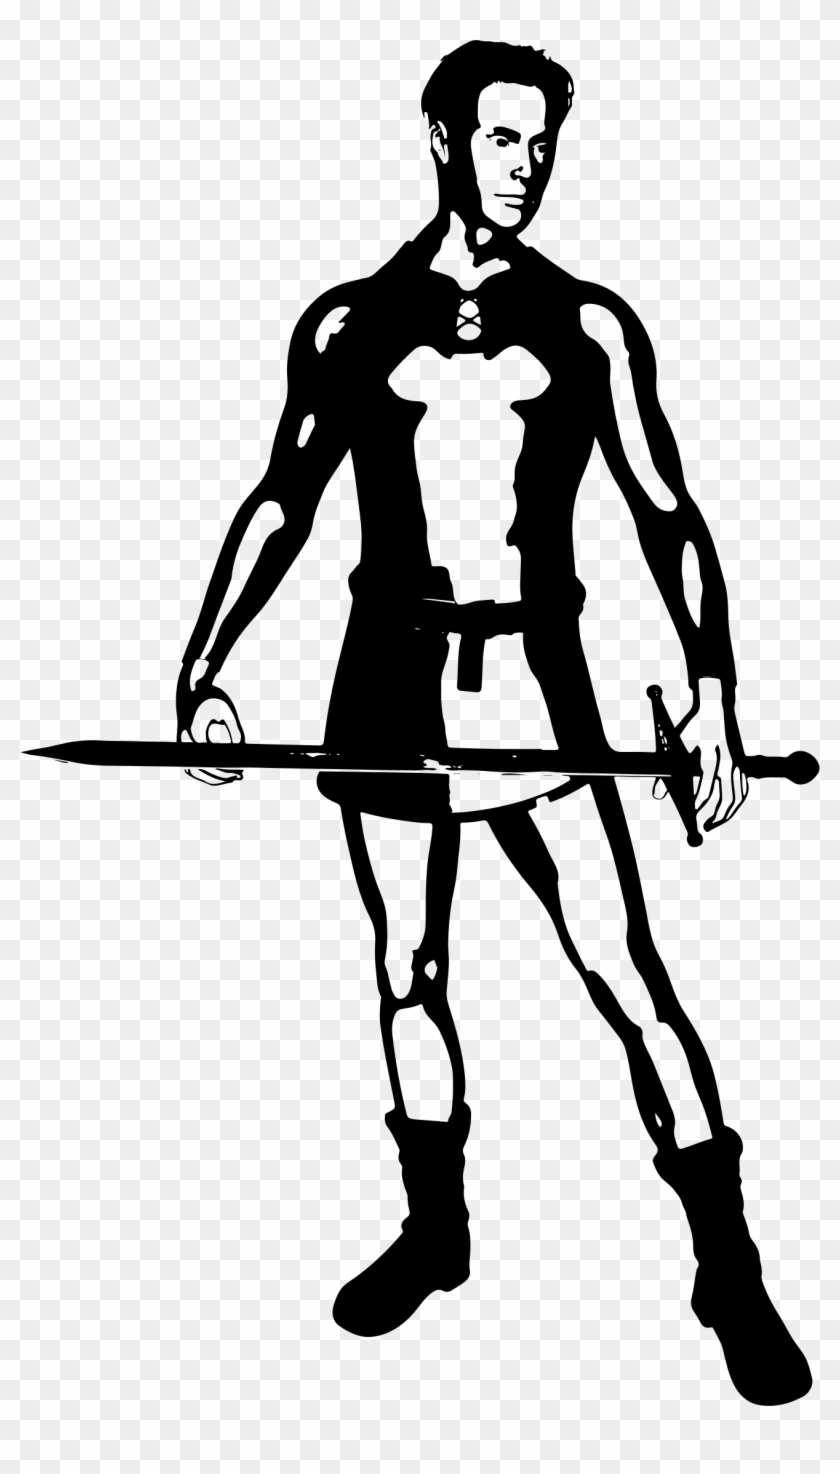 This Free Icons Png Design Of Knight With Sword Silhouette - Dibujo Hombre Edad Media Clipart #3789906